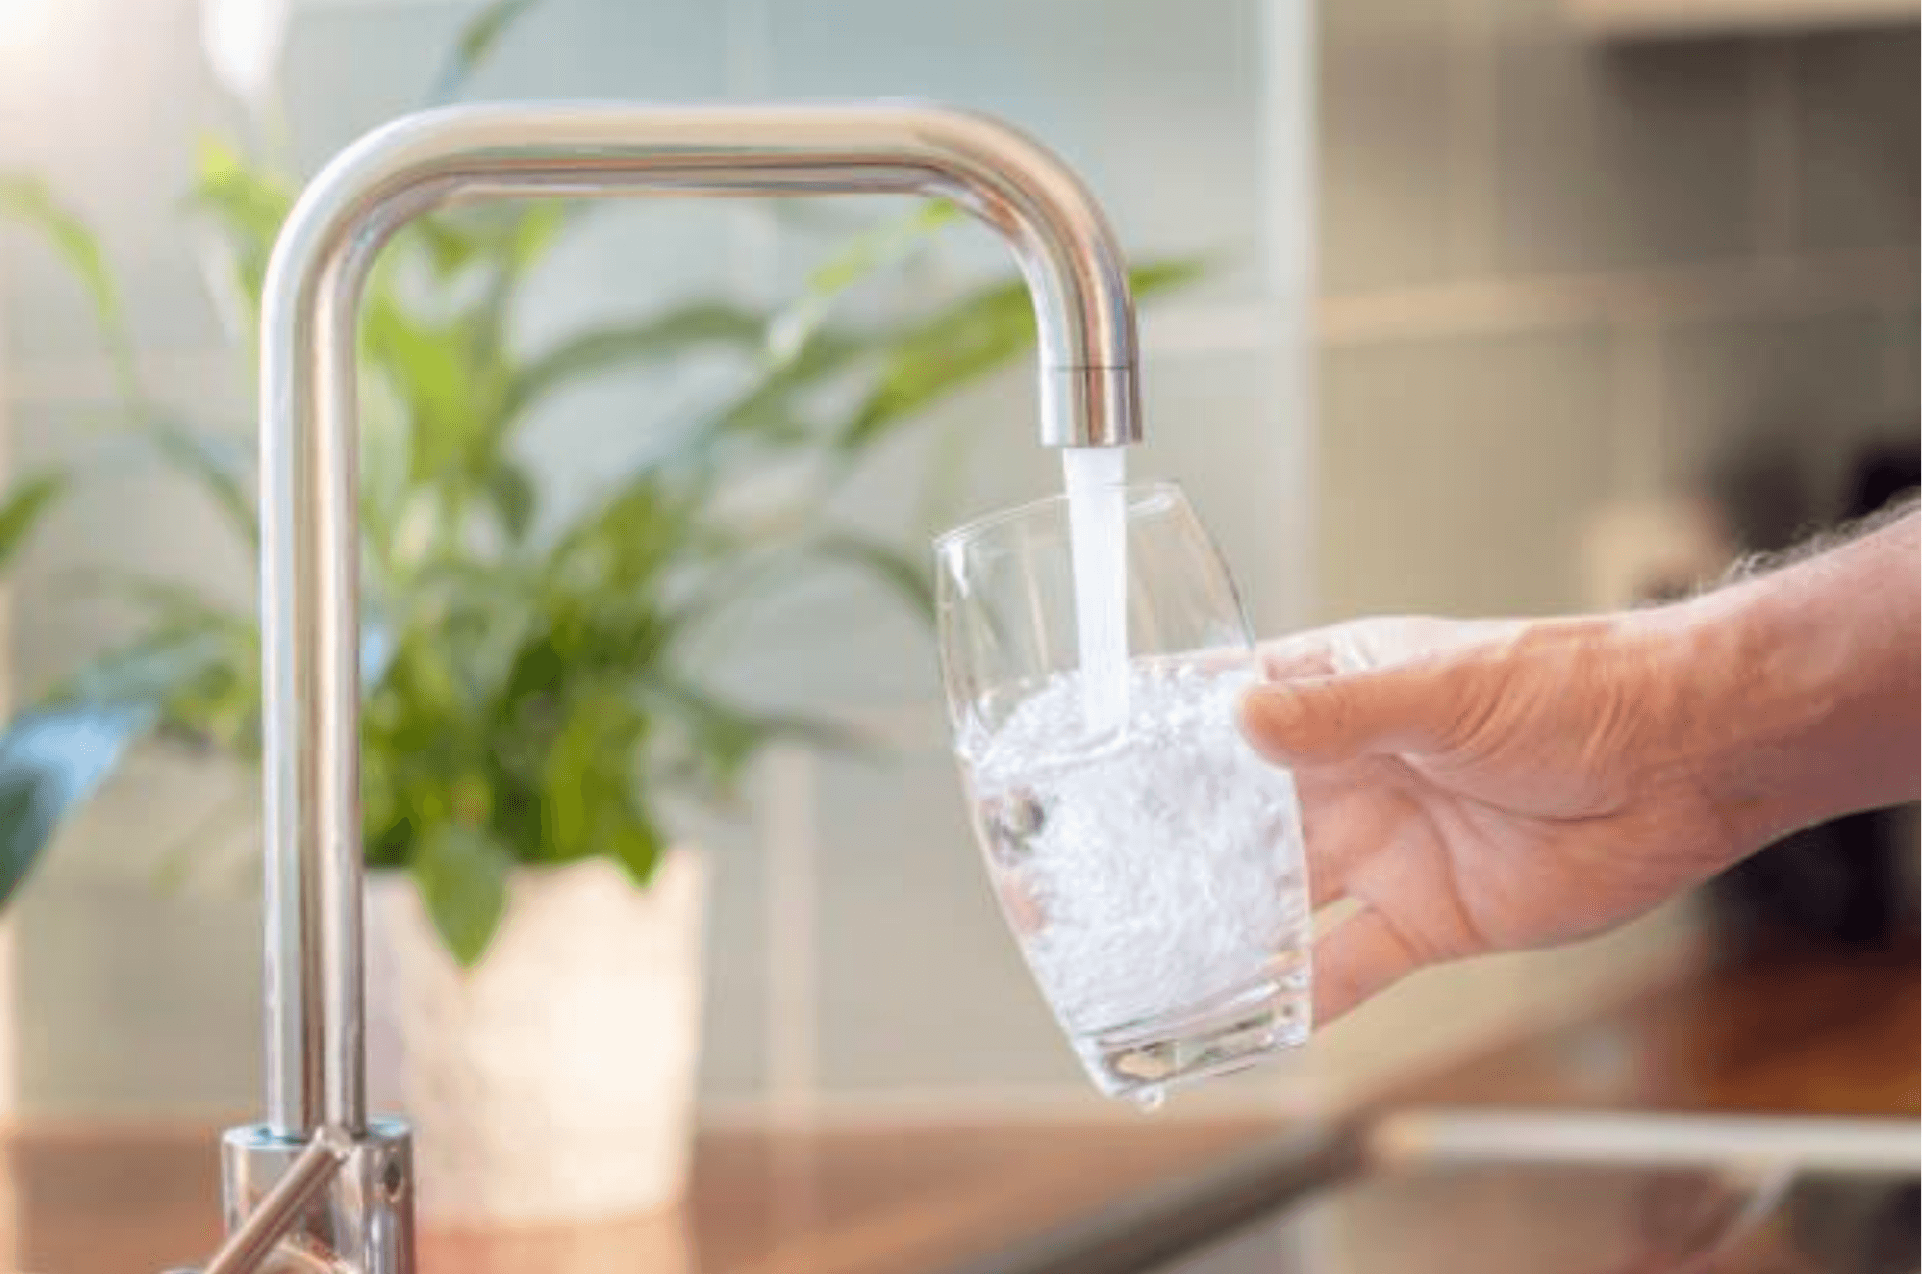 A hand holding a glass under a tap filling it with water.